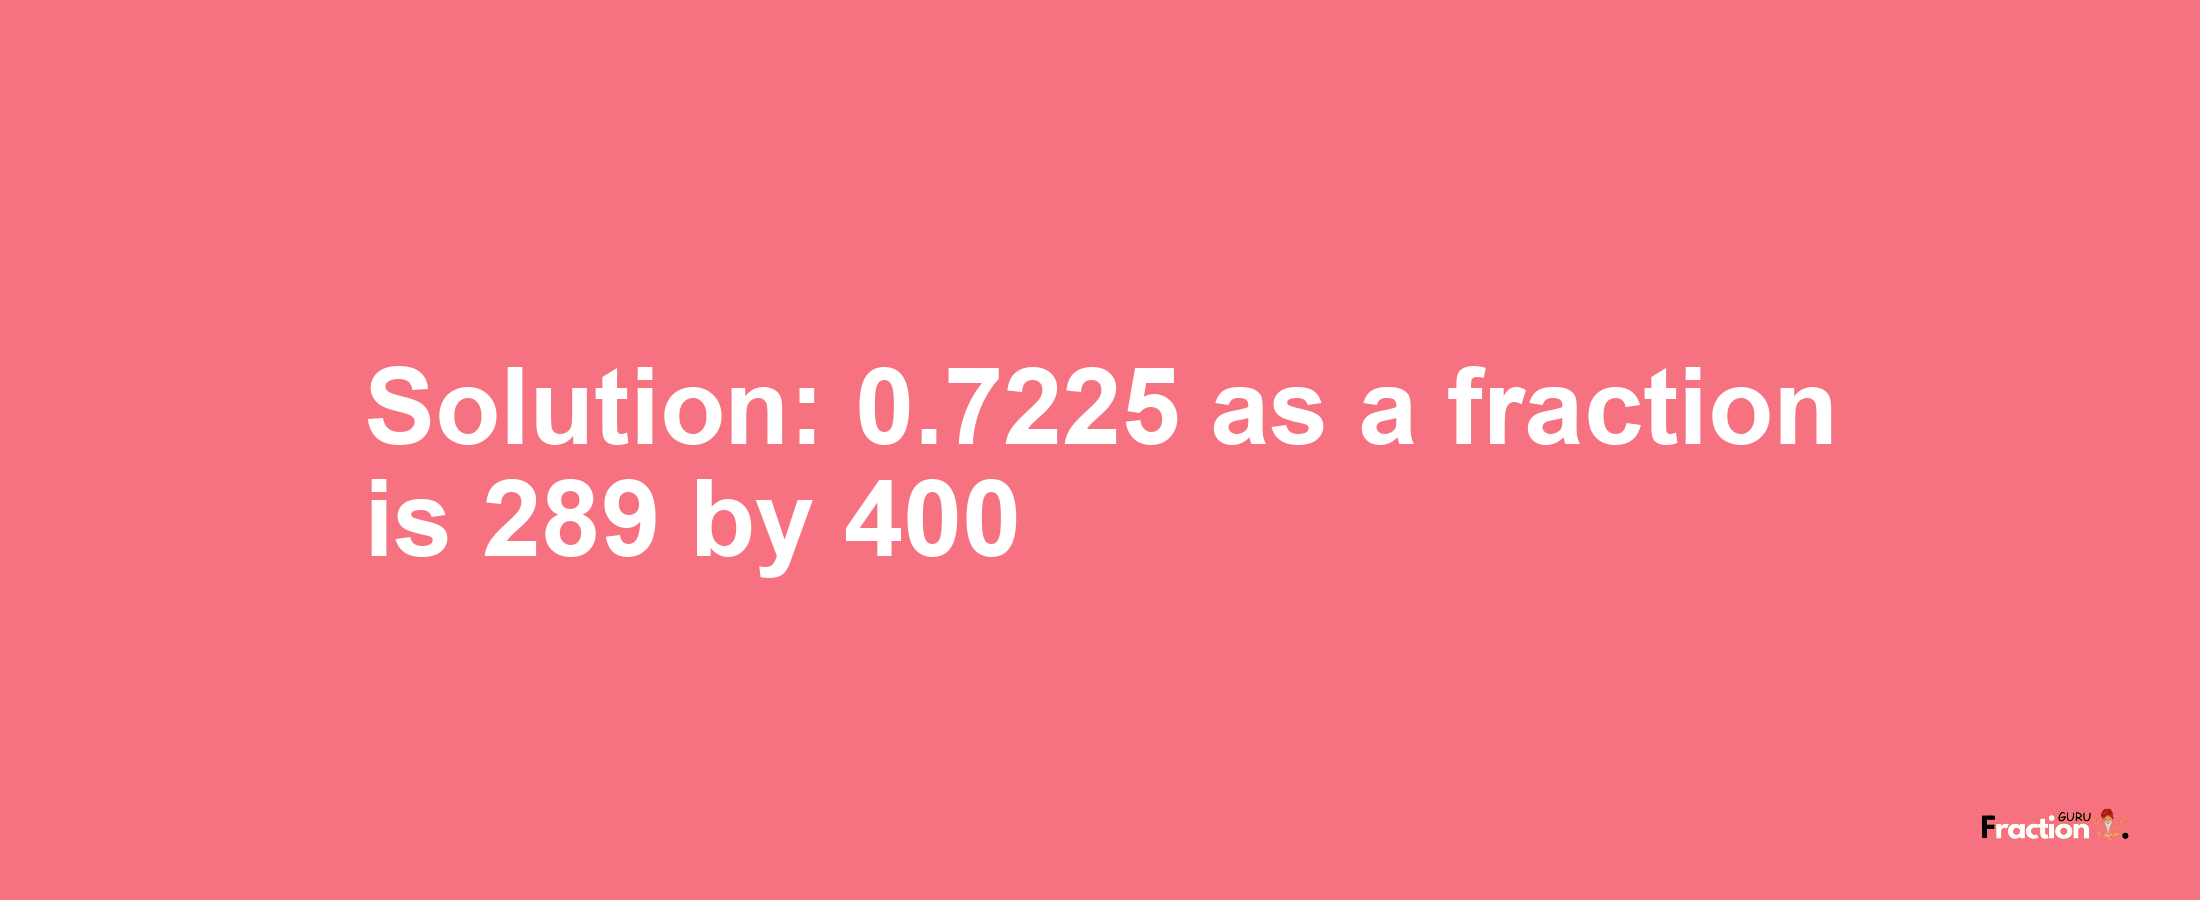 Solution:0.7225 as a fraction is 289/400